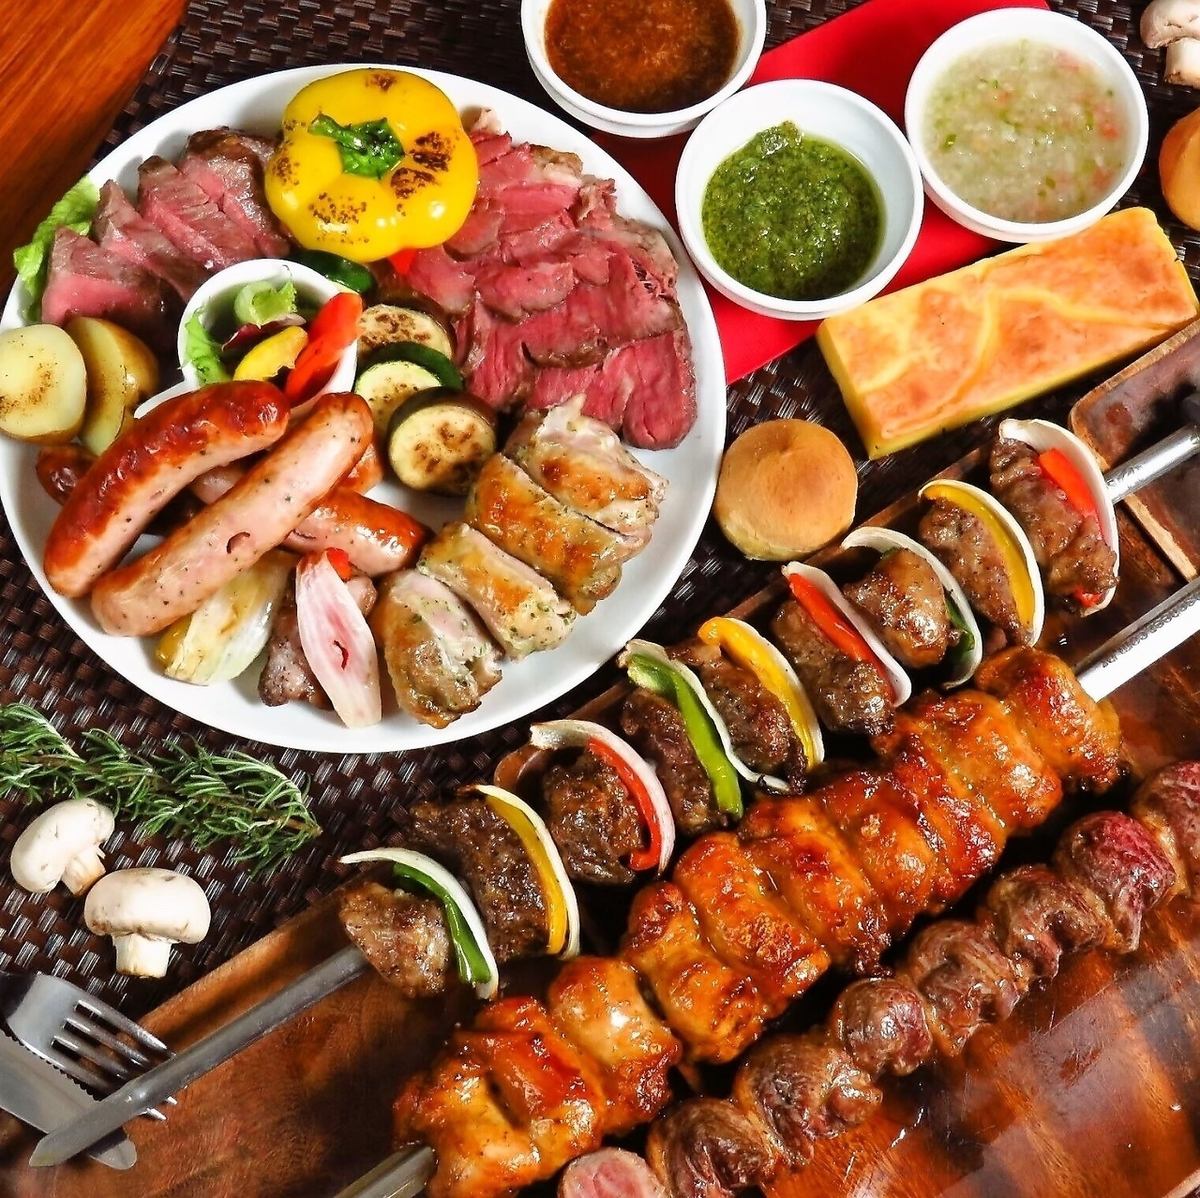 Enjoy as much meat as you like! All-you-can-eat 20 kinds of Churrasco!